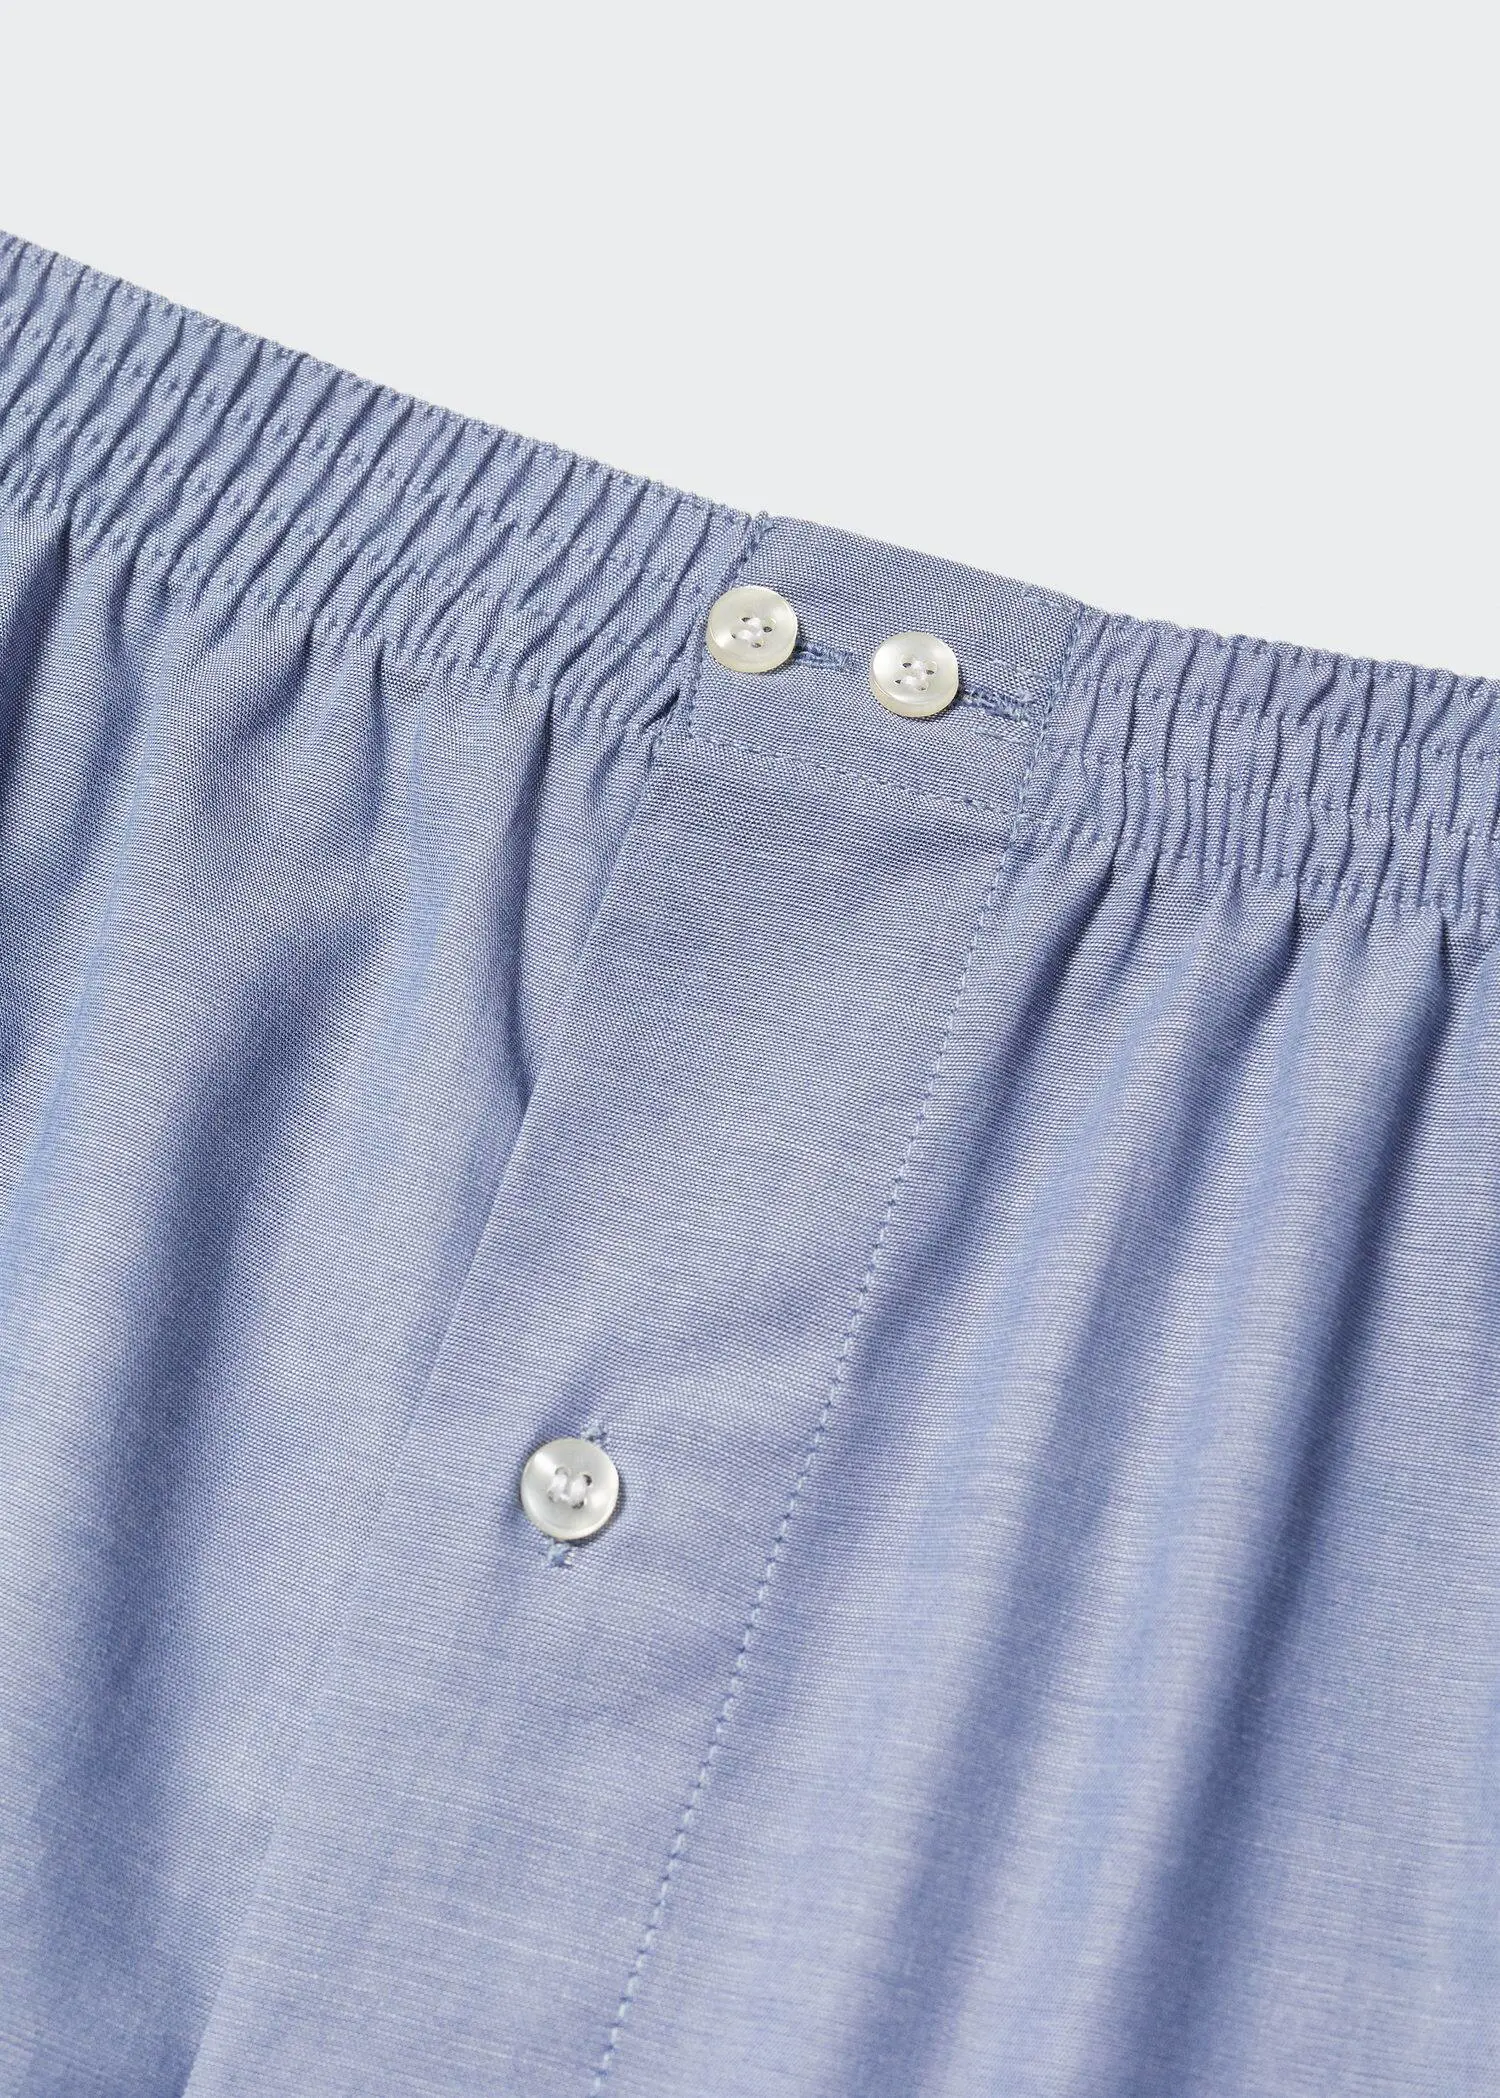 Mango 100% cotton plain briefs. a close up view of the buttons on a pair of boxers. 